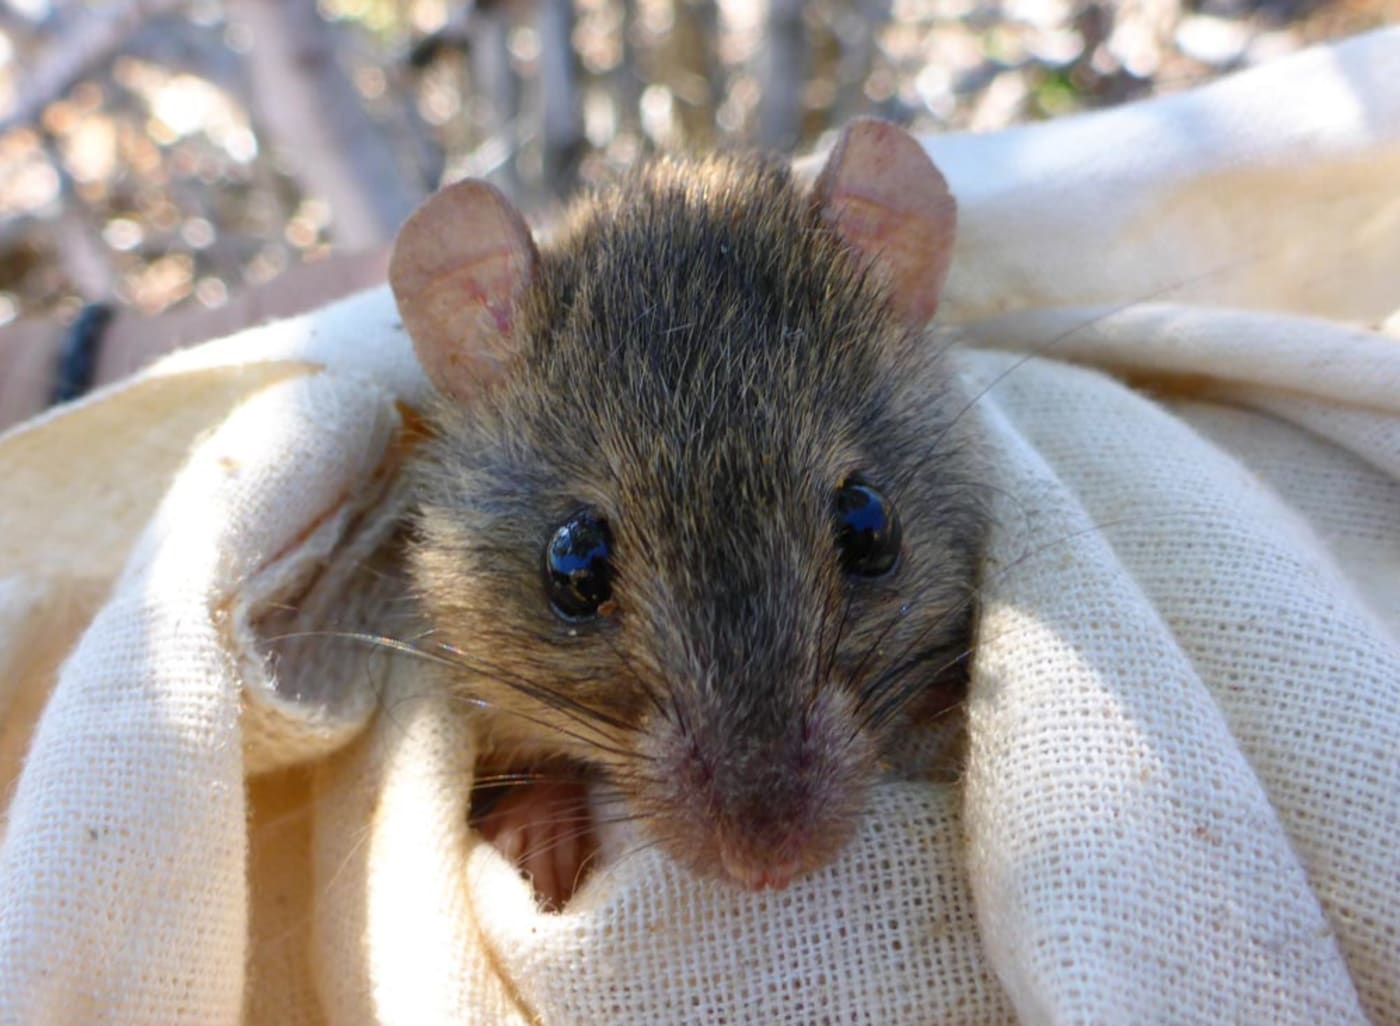 A melomys from the Torres Strait which gives an idea of the size of Bramble Cay melomys